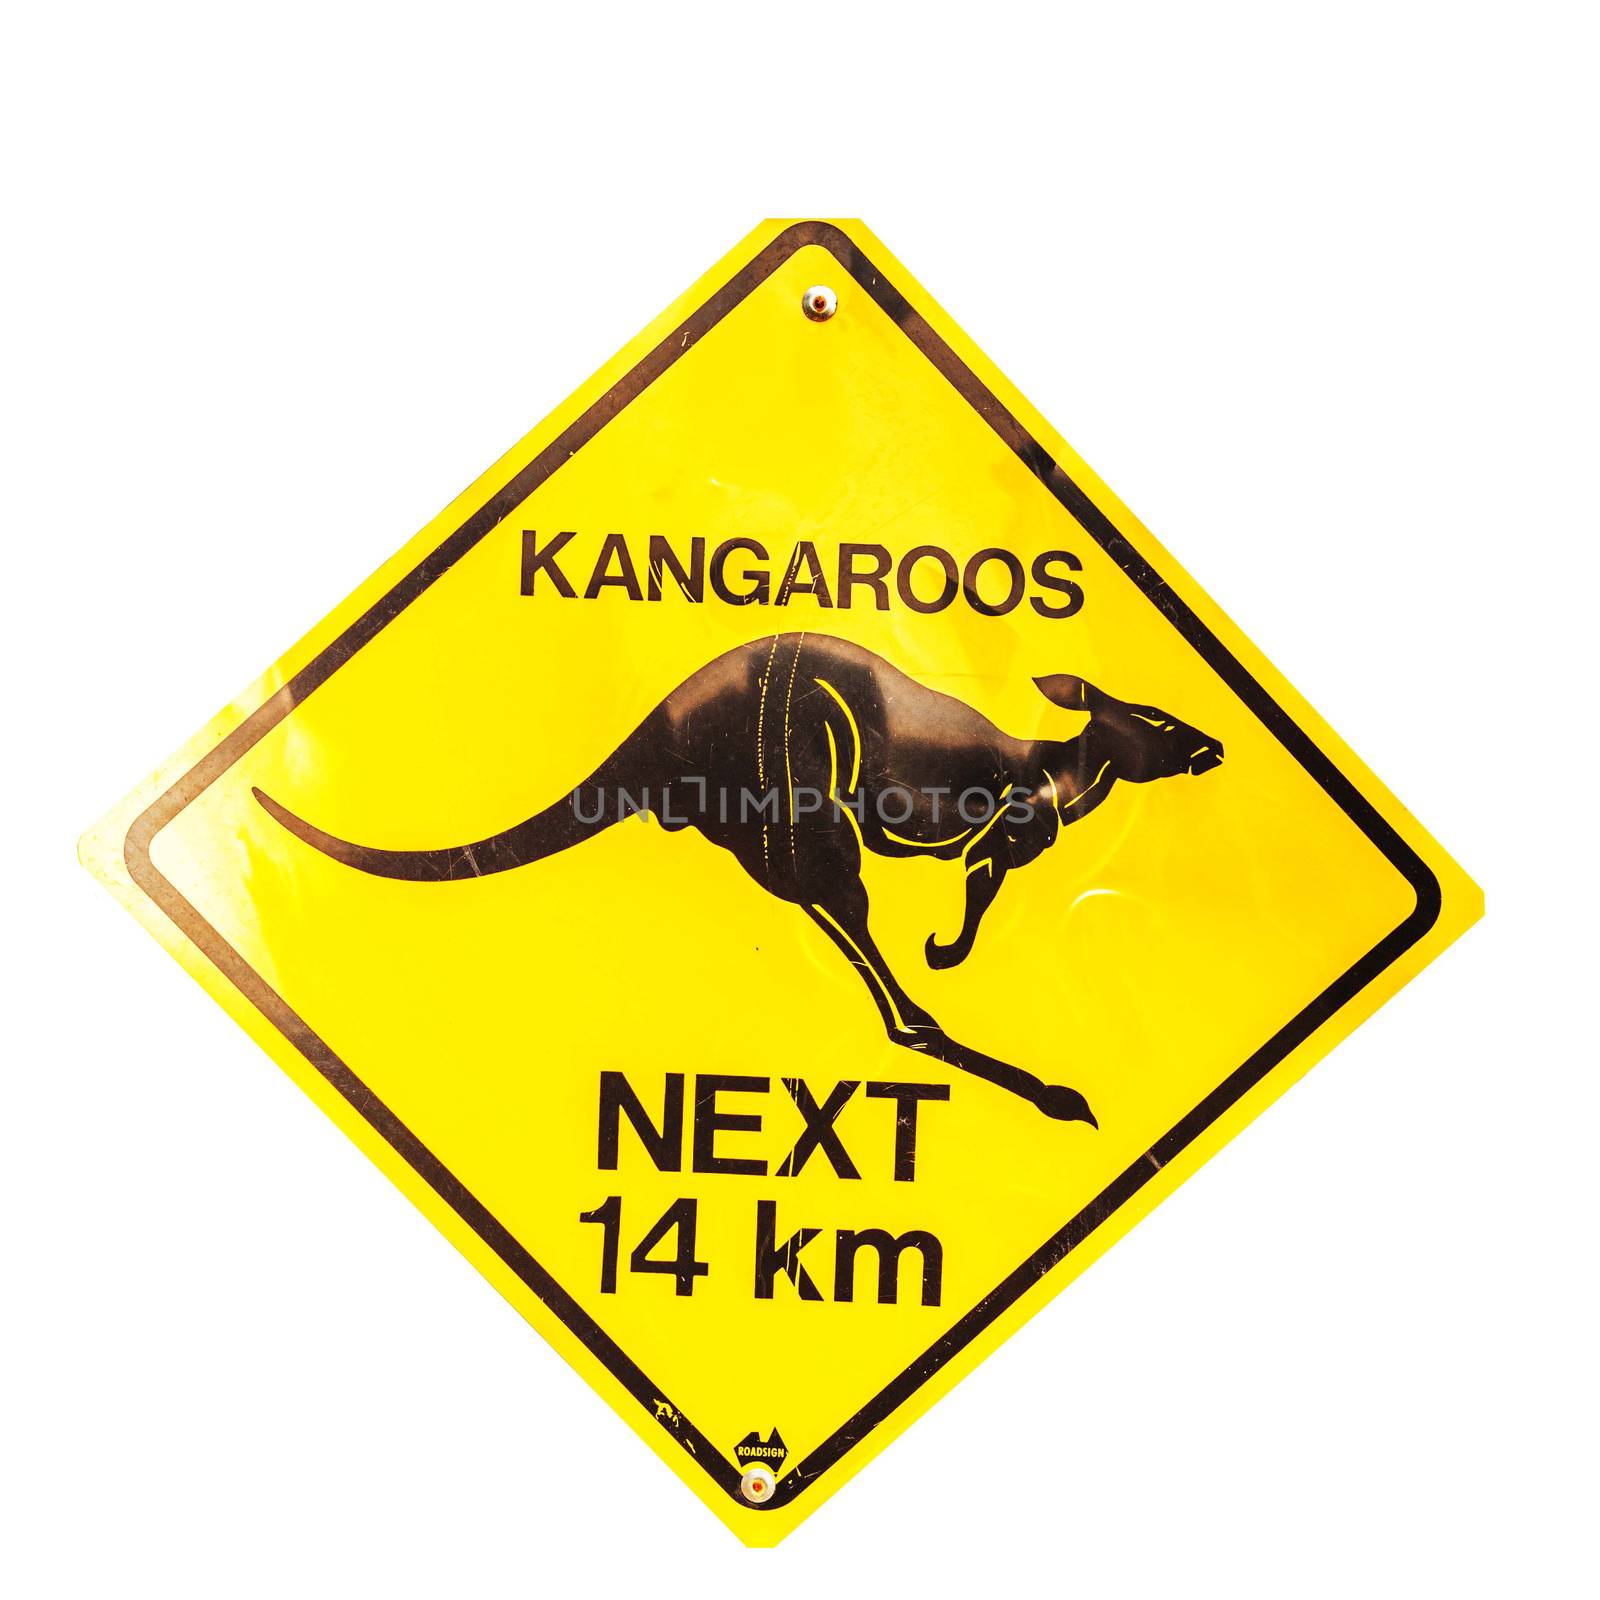 Kangaroos sign with clipping path by nopparats